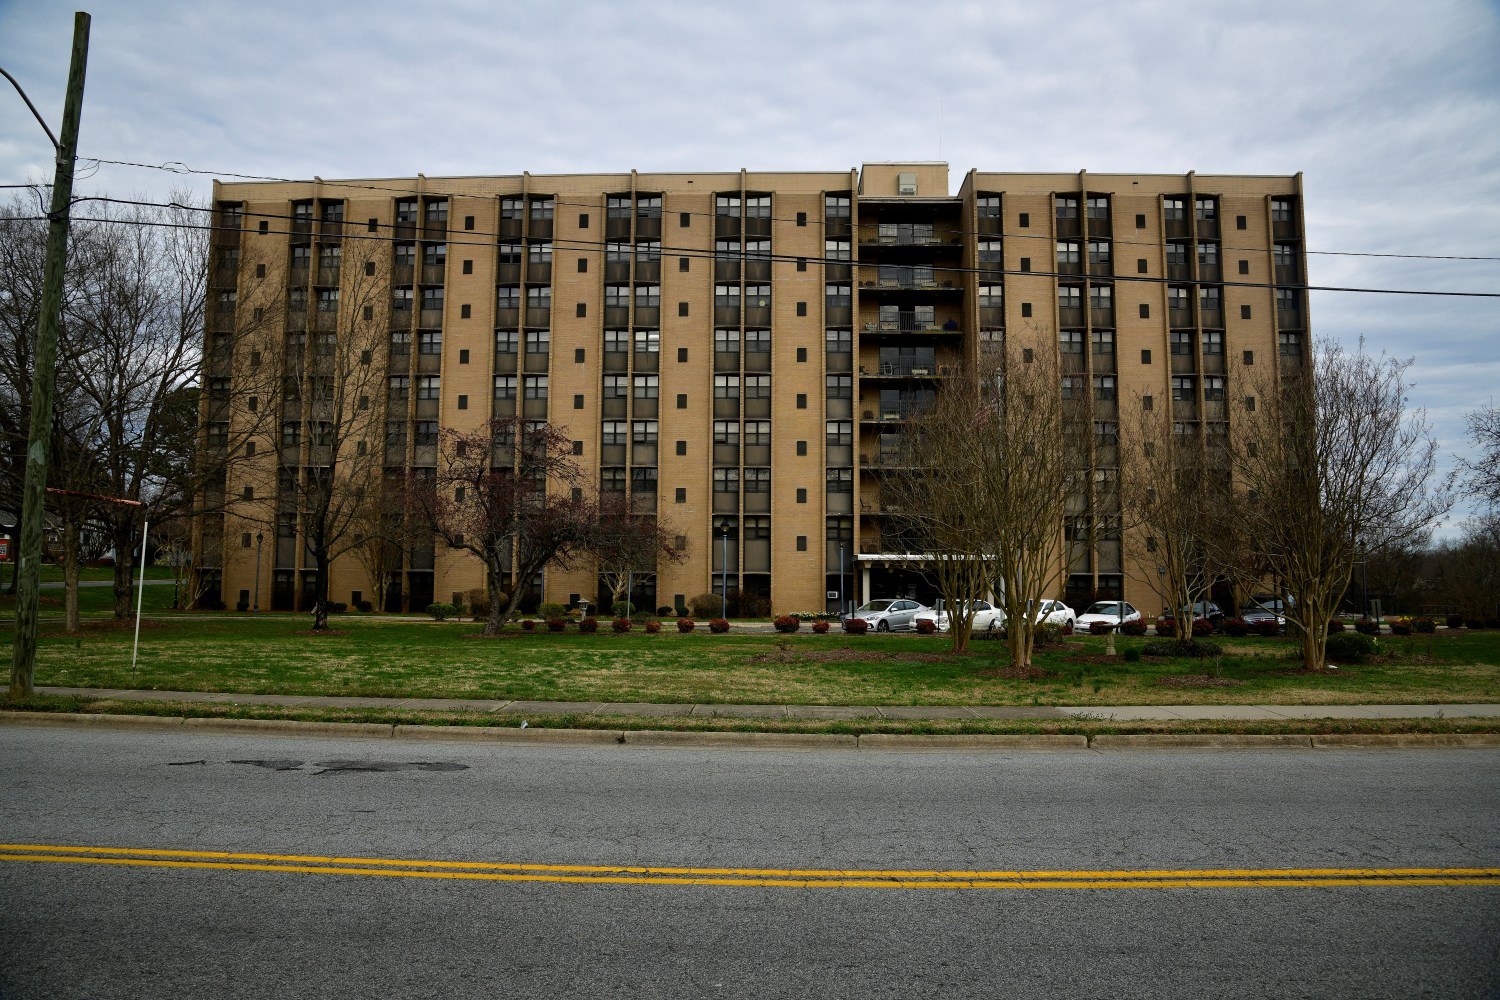 An apartment building on the east side of N. Church Street, which forms part of the boundary line between Congressional Districts 6 and 13 in Greensboro, North Carolina, U.S. March 13, 2019.  Picture taken March 13, 2019.  REUTERS/Charles Mostoller